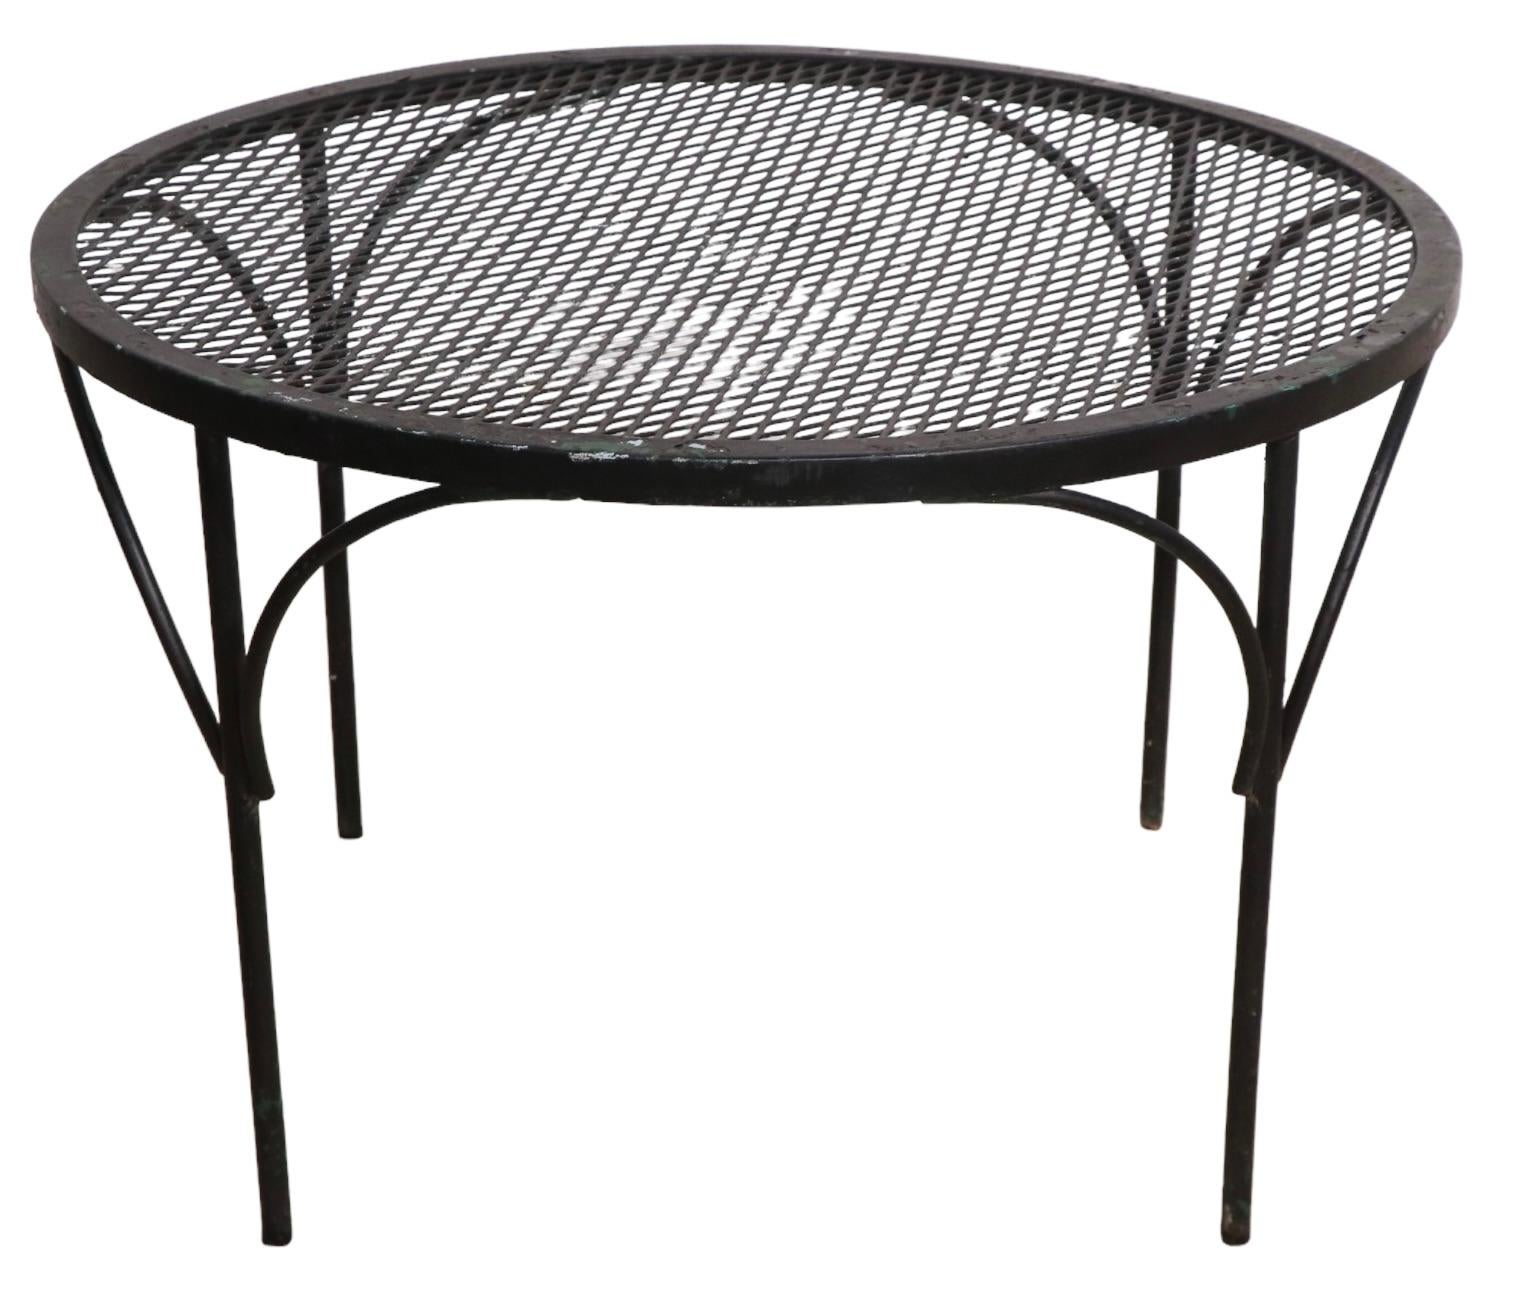 Chic architectural mid century coffee table of wrought iron and metal mesh, attributed to Salterini. This example is in very good, clean, and original condition, perfect for the garden, patio, or poolside use. 
 Please view our extensive collection